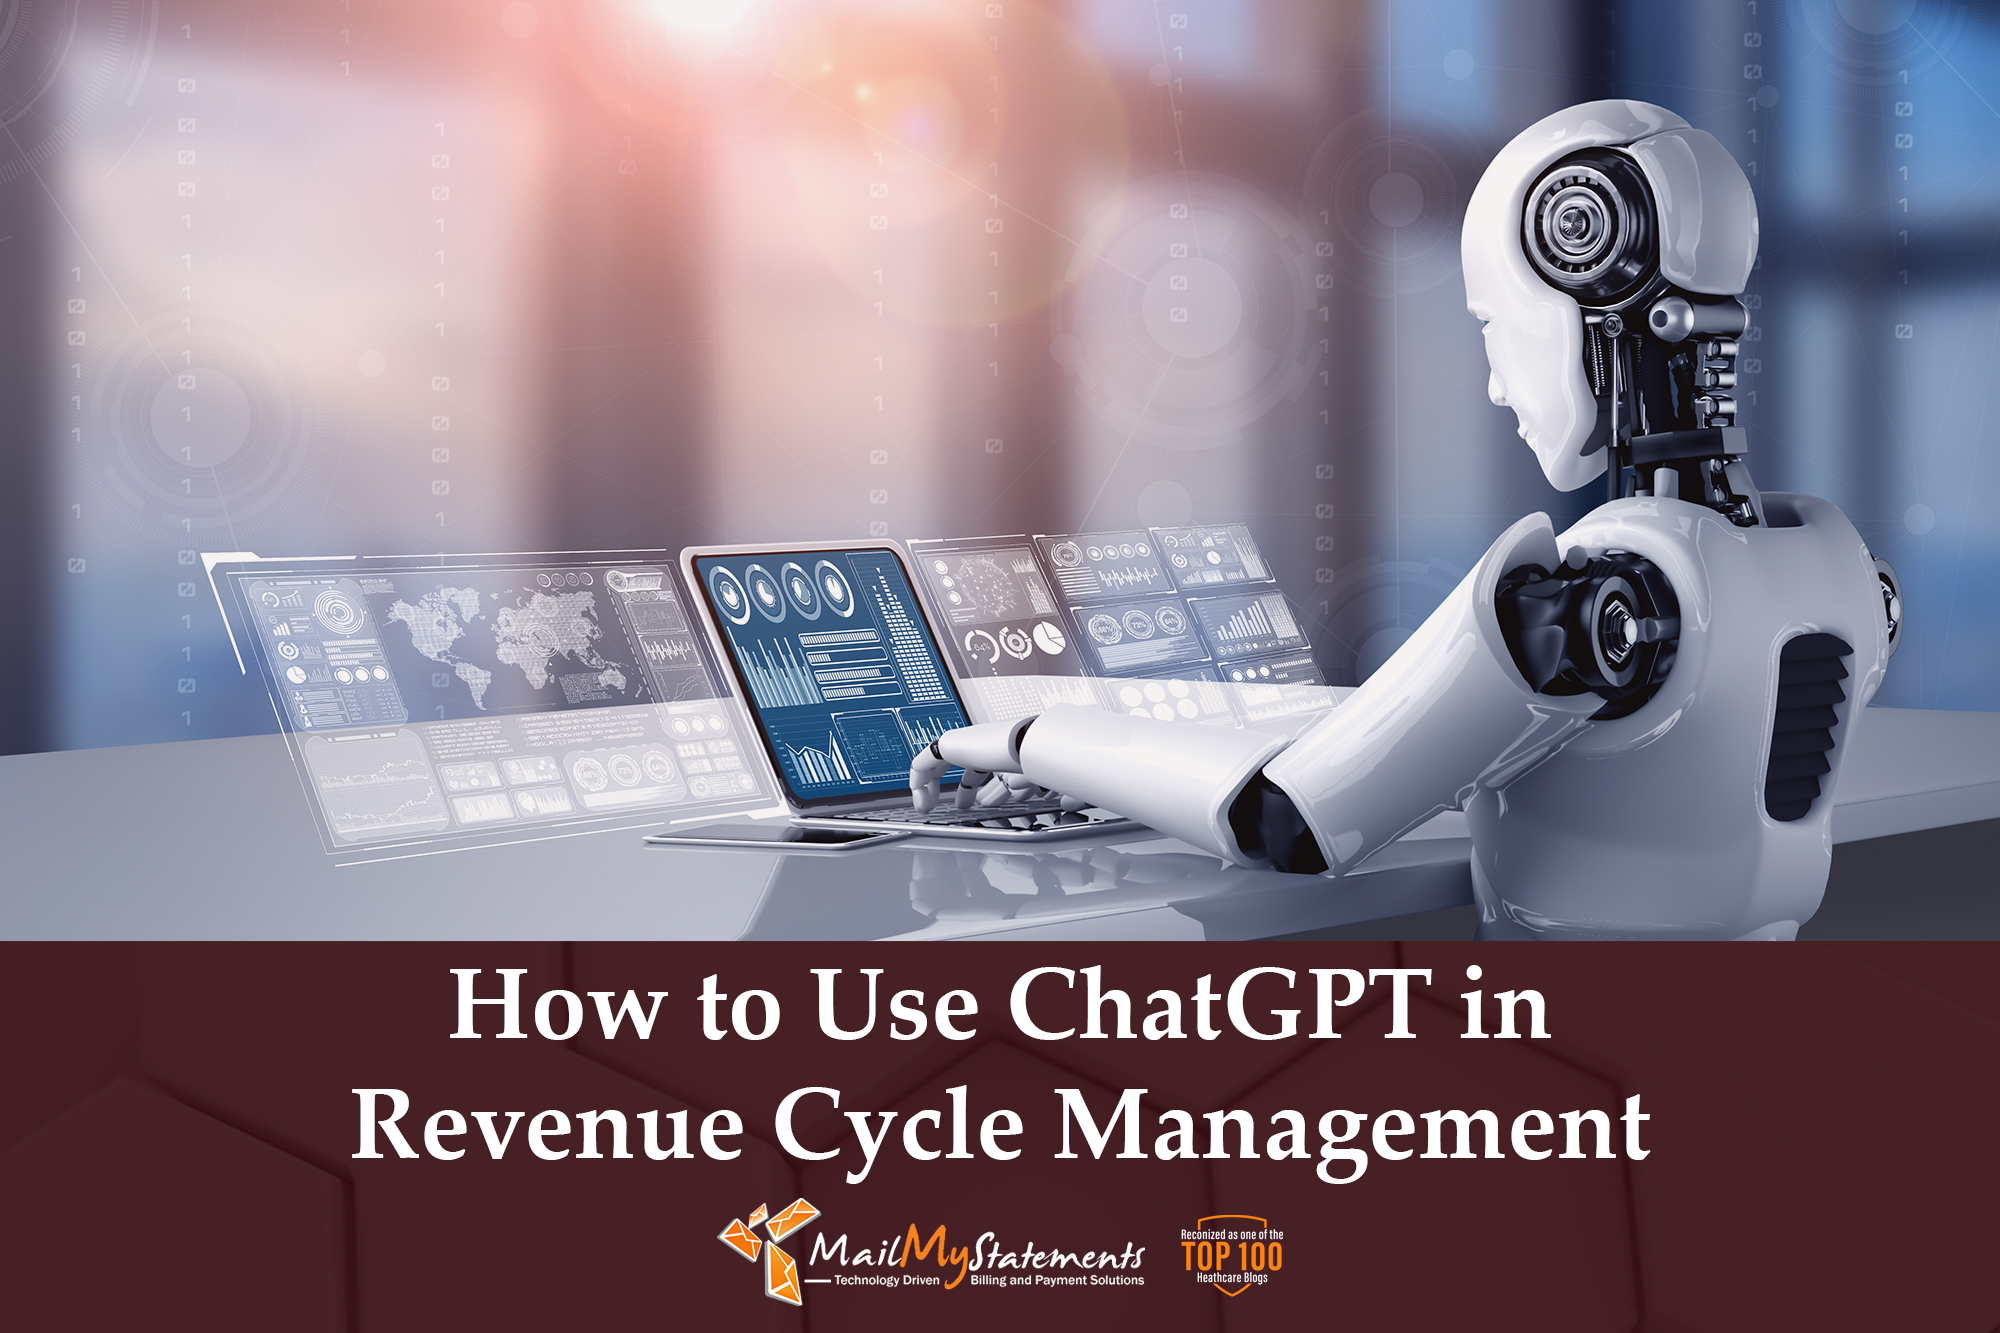 How to Use ChatGPT in Revenue Cycle Management